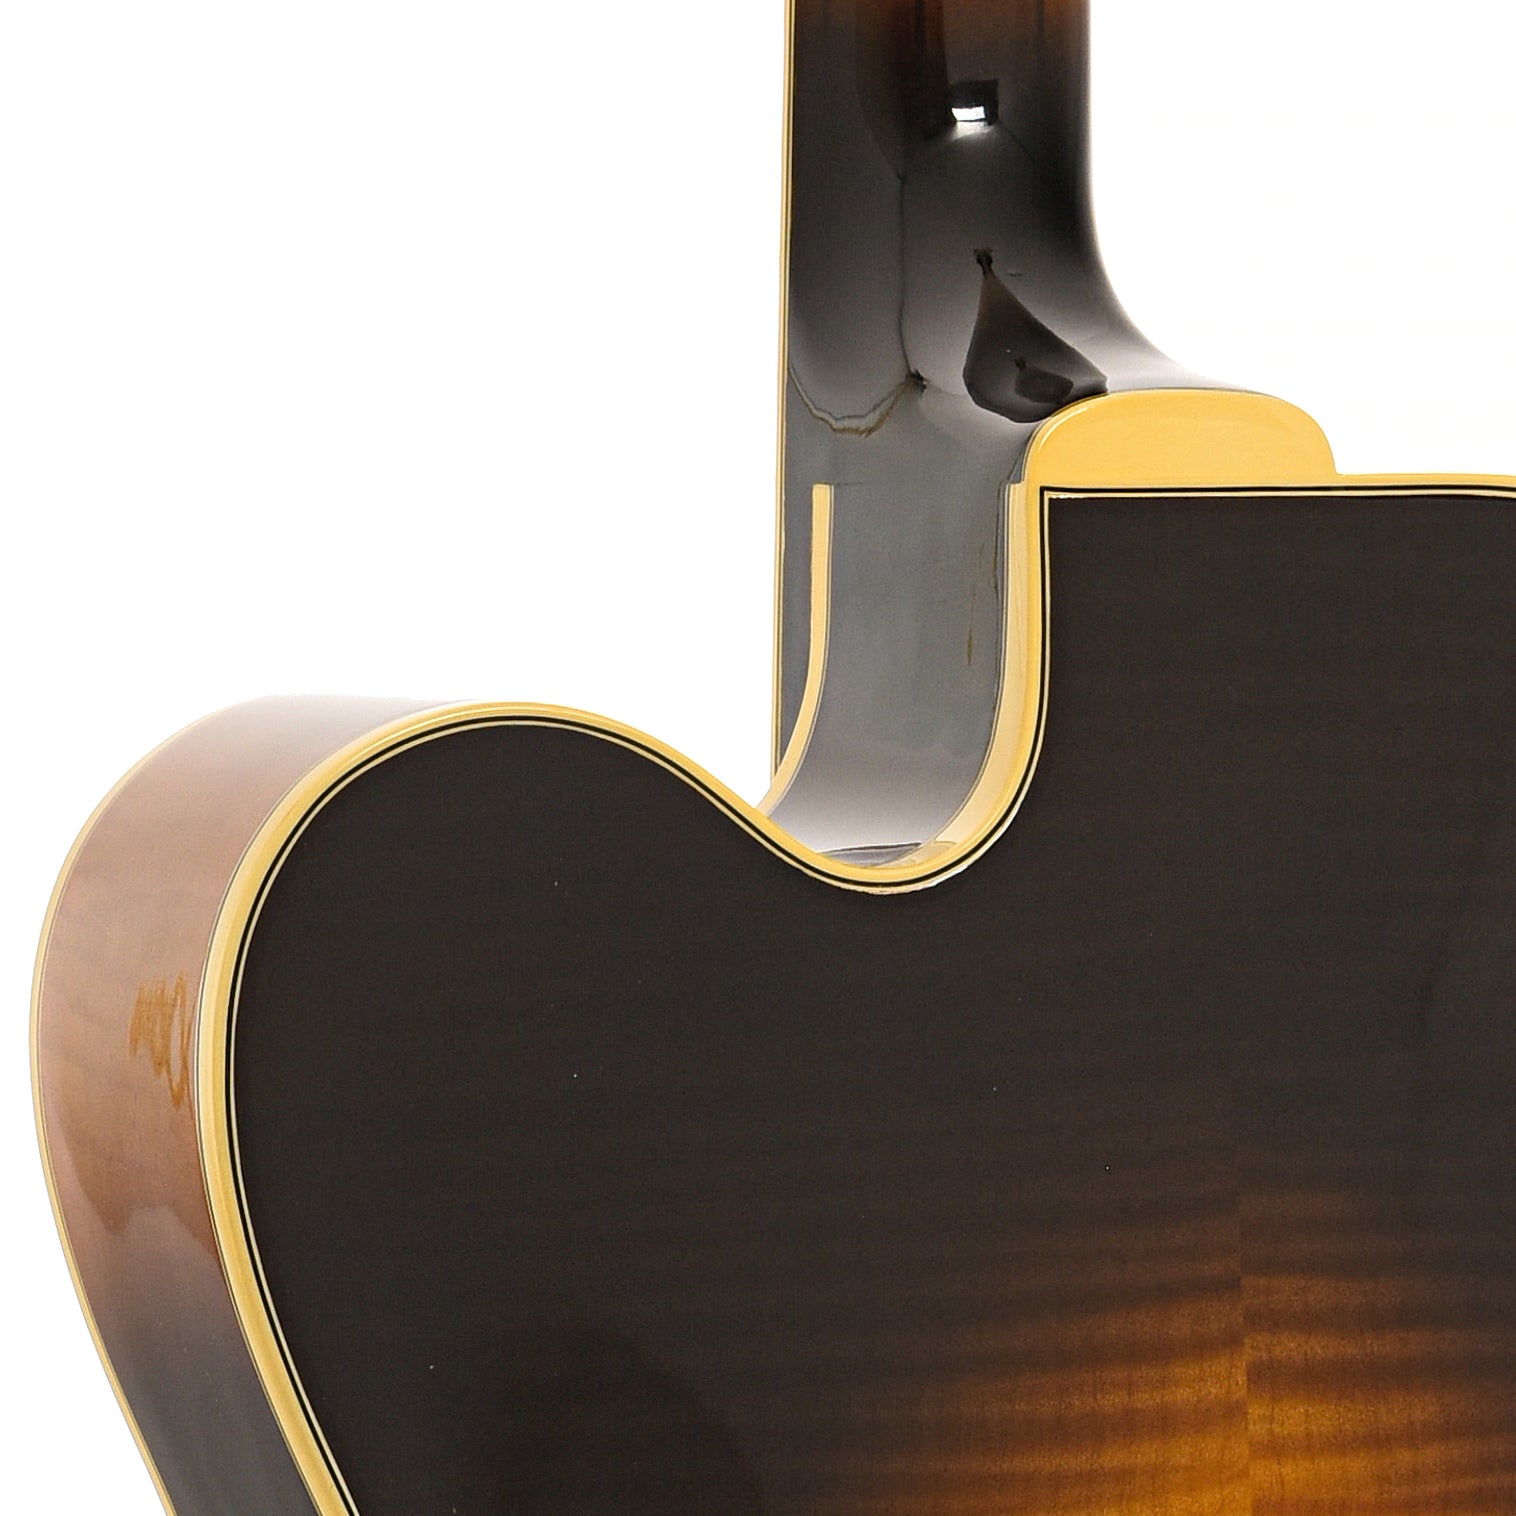 Heel of Gibson Super 400 CES Hollow Body